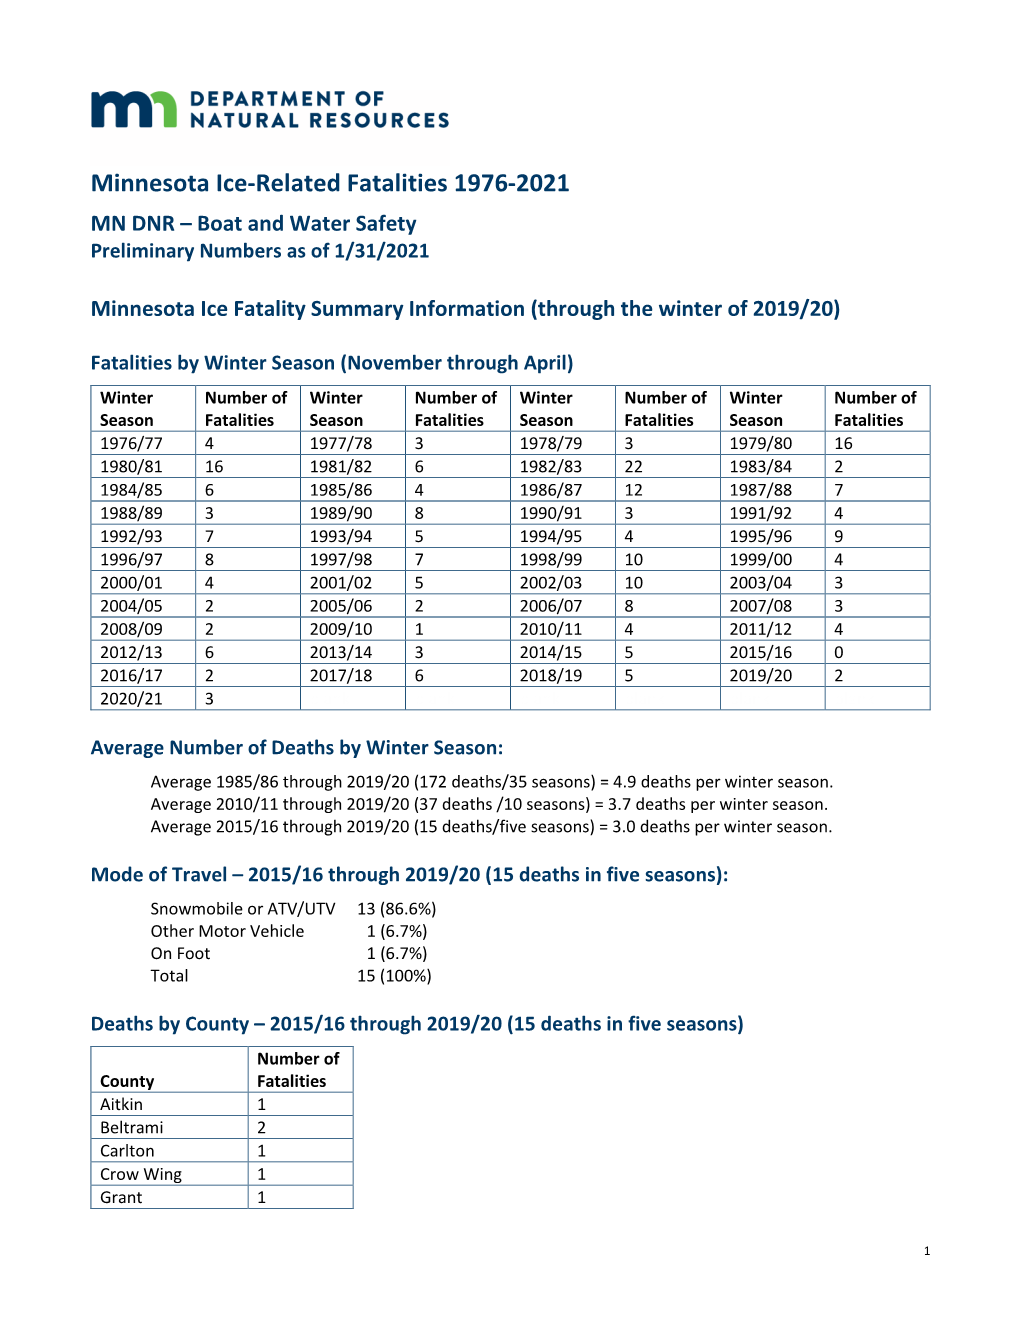 Minnesota Ice-Related Fatalities 1976-2021 MN DNR – Boat and Water Safety Preliminary Numbers As of 1/31/2021